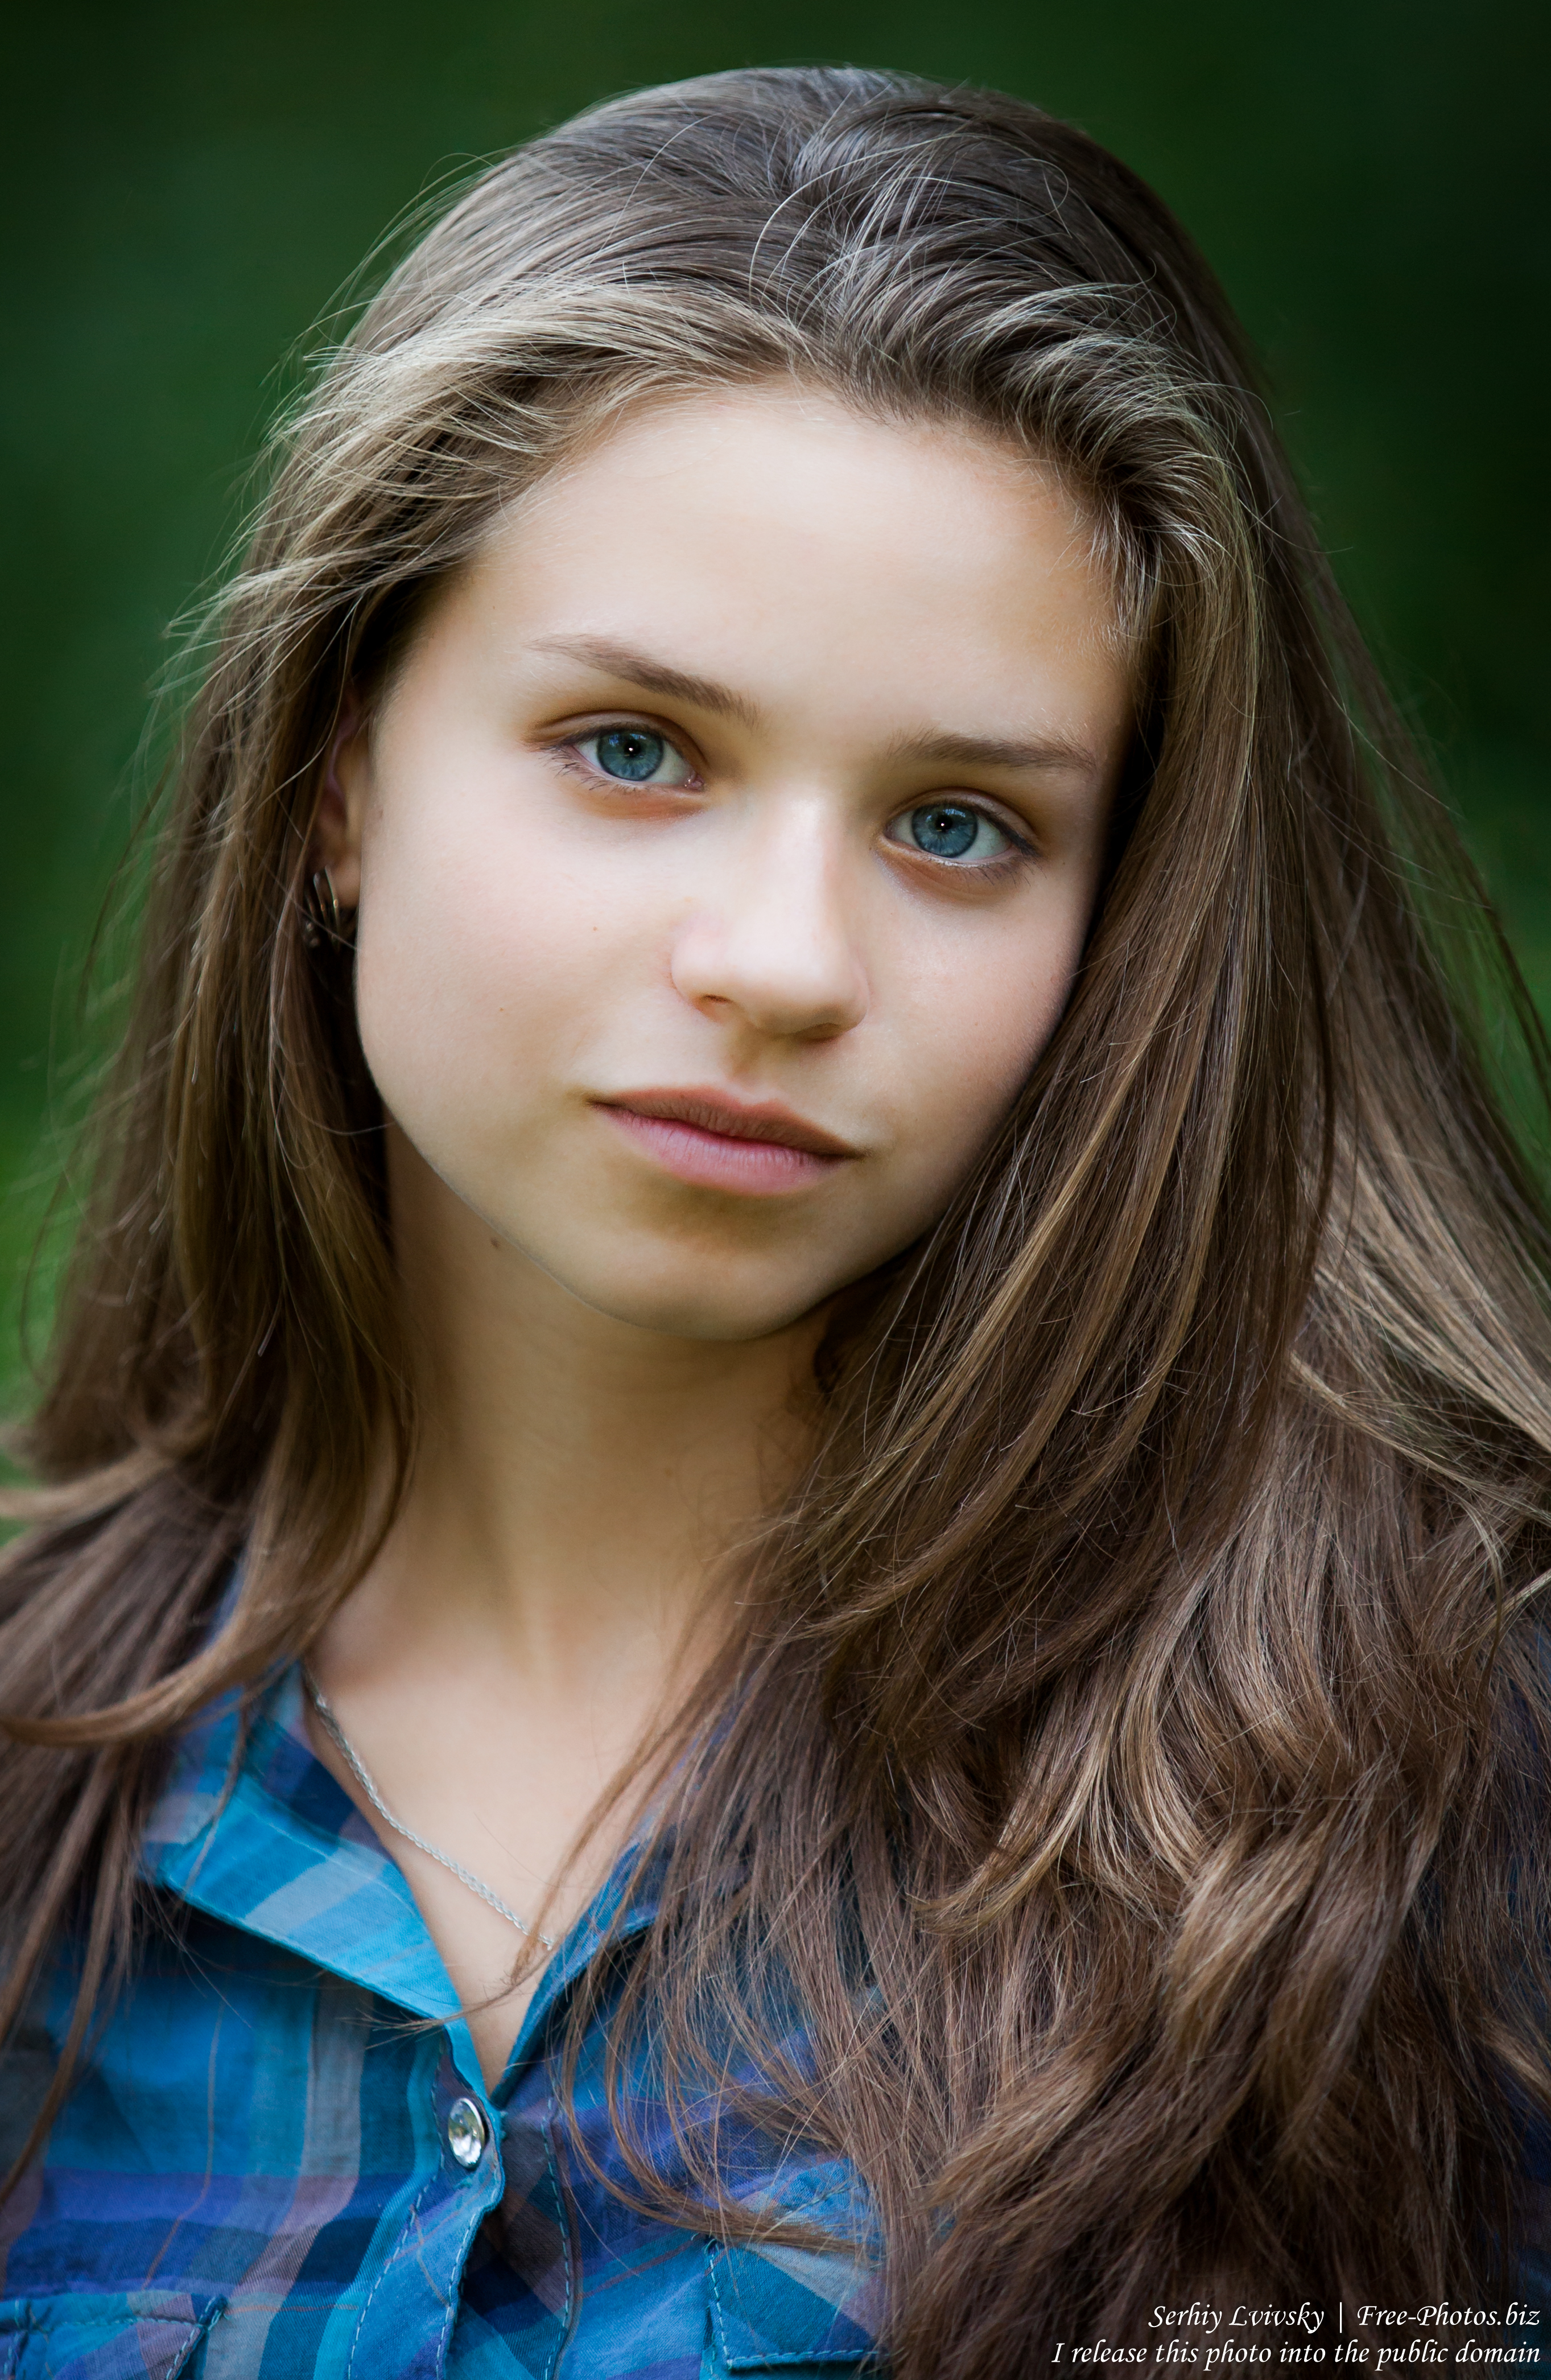 Photo of a pretty 13-year-old Catholic girl photographed ...